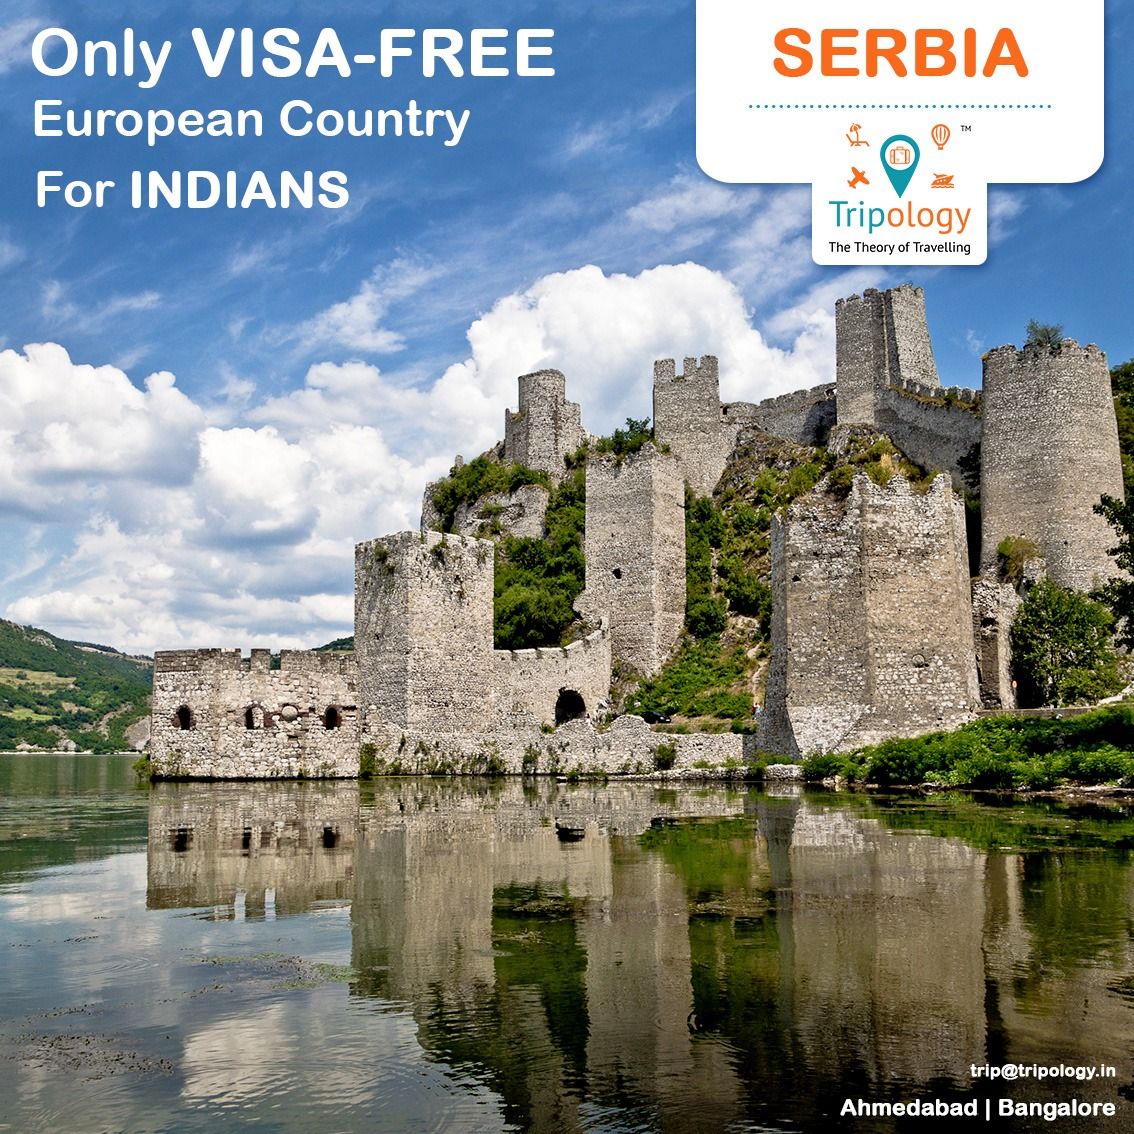 Visit Serbia the only Visa free European Country for Indian with Tripology Holidays.

For more information visit : buff.ly/2HoEpez

#Tripology #Holidays #Tour #Serbia #EuropeanCountry #Packages #Travel #Ahmedabad #Bangalore